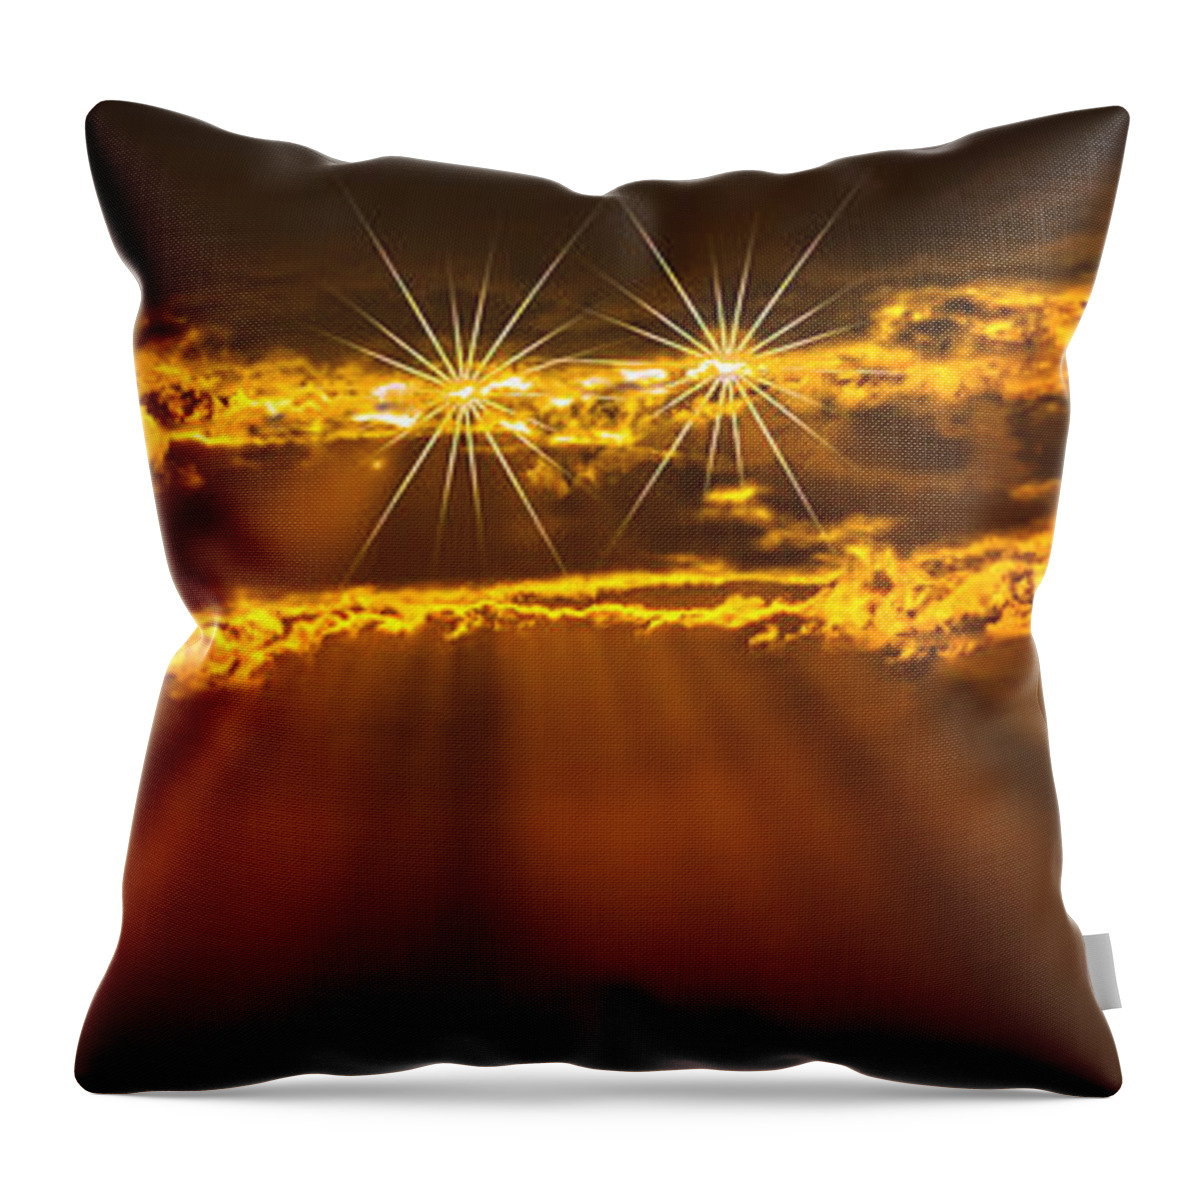 Arizona Throw Pillow featuring the photograph Perpetual Light by Mark Myhaver